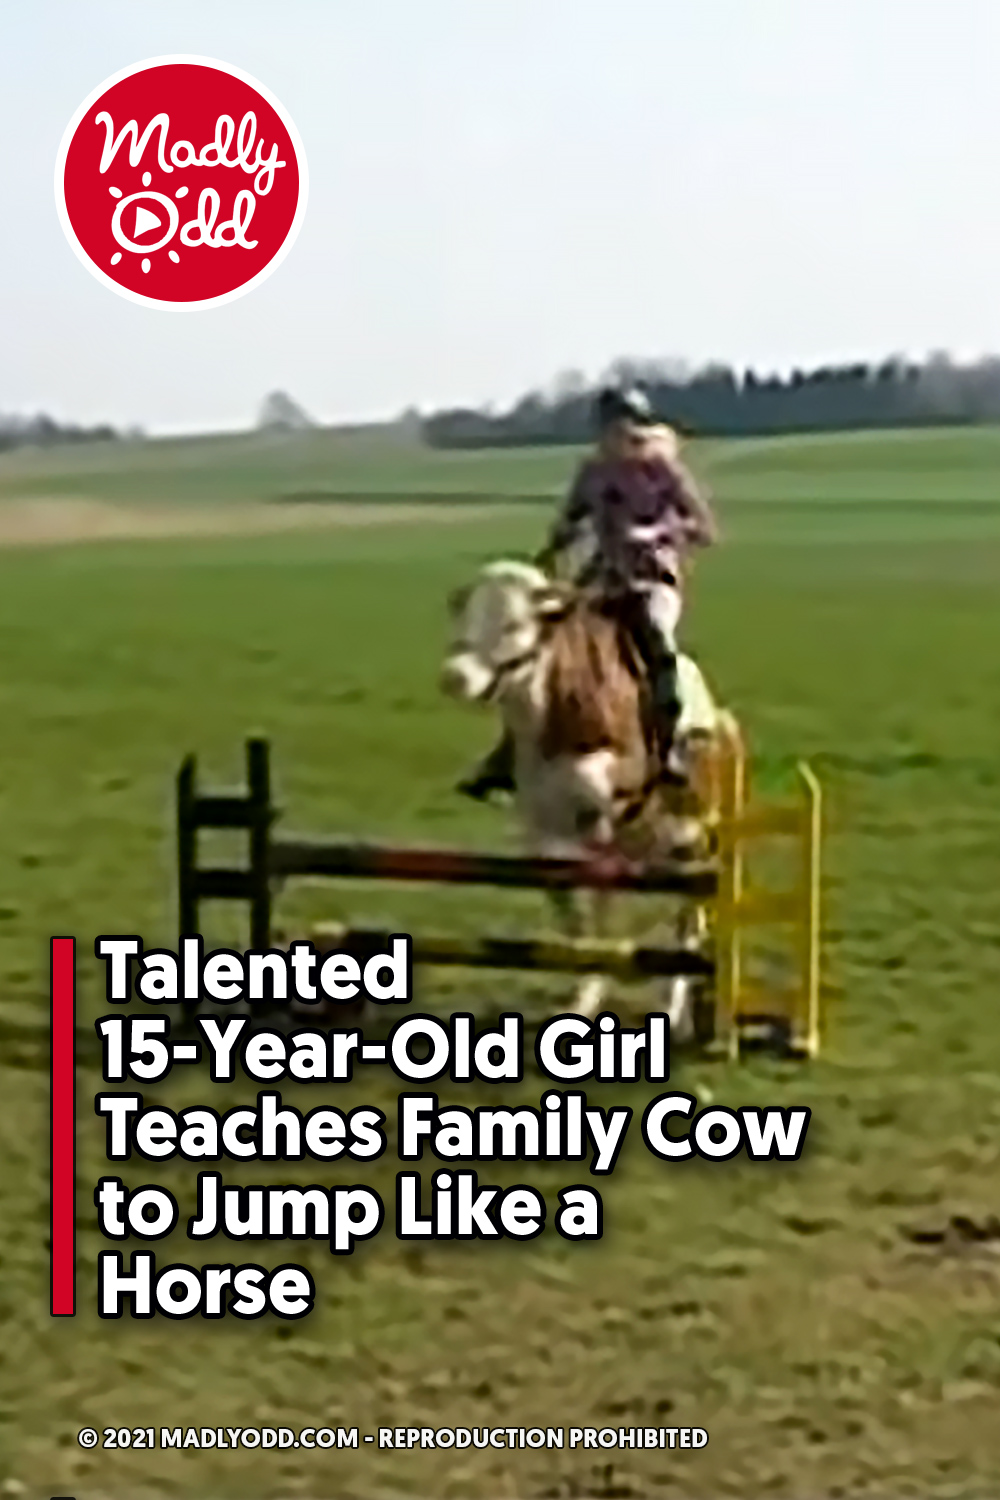 Talented 15-Year-Old Girl Teaches Family Cow to Jump Like a Horse